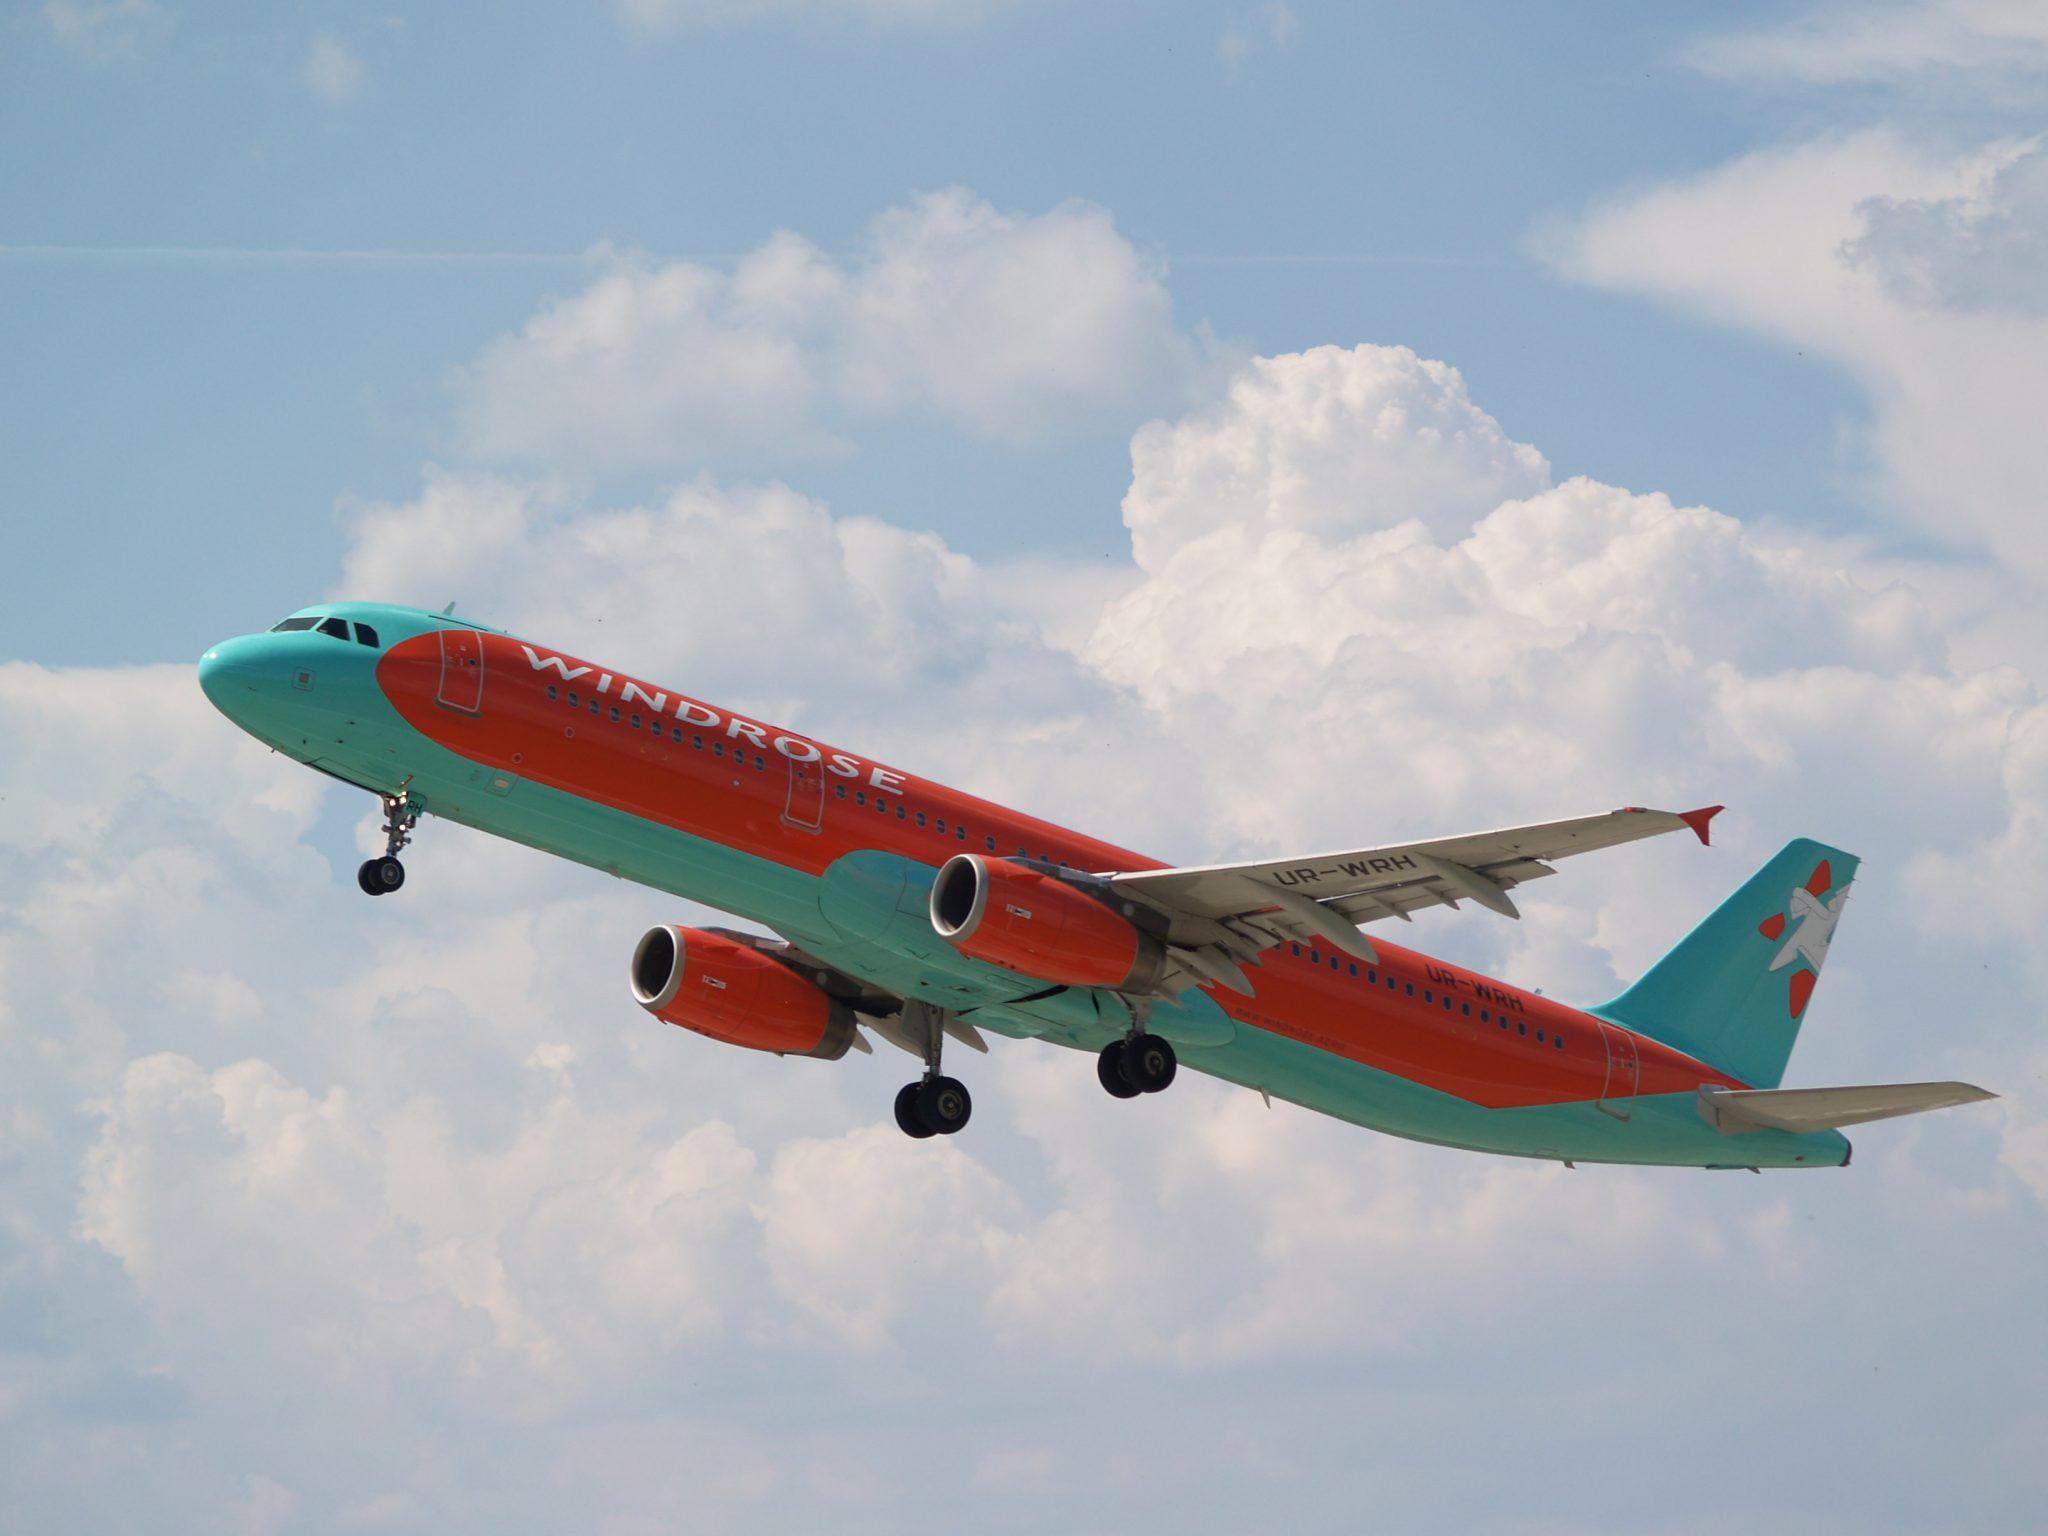 Vallair leases Airbus A321 to Windrose